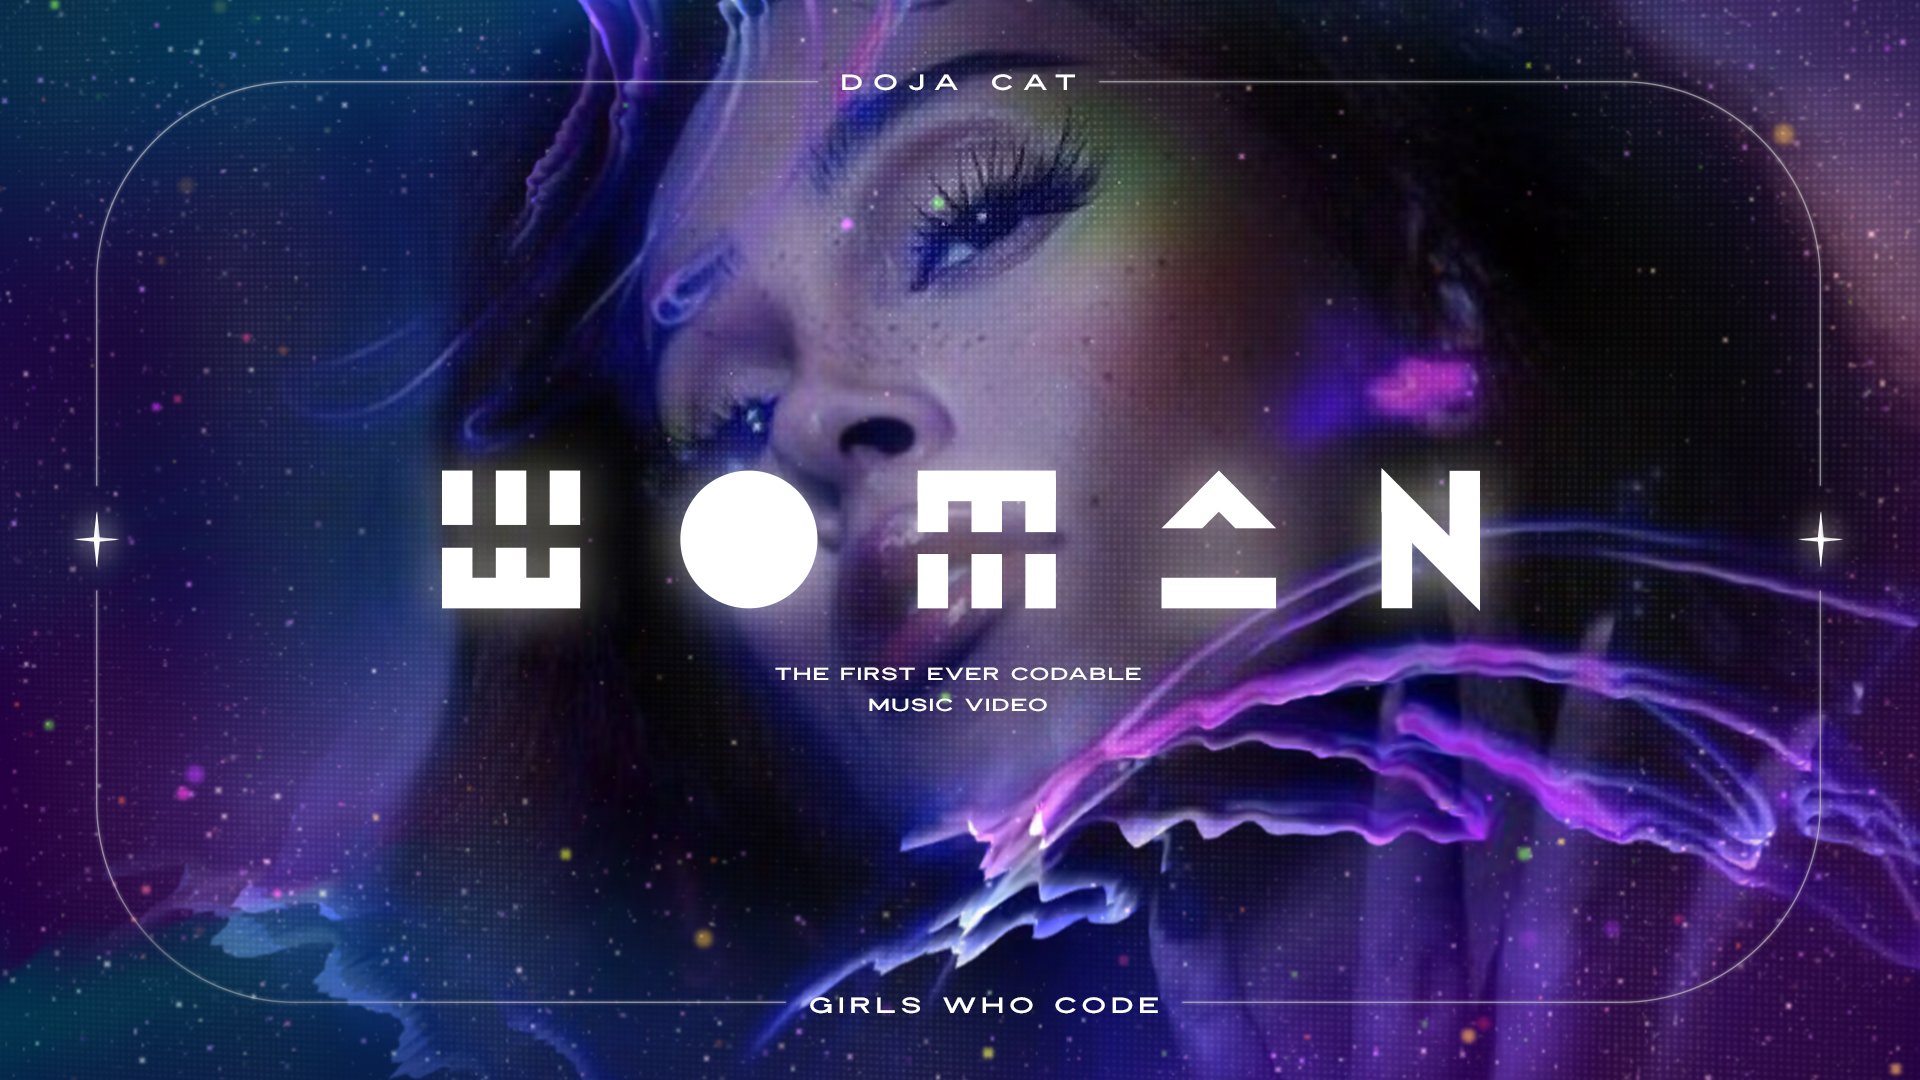 DojaCode is an interactive music video from Doja Cat and Girls Who Code